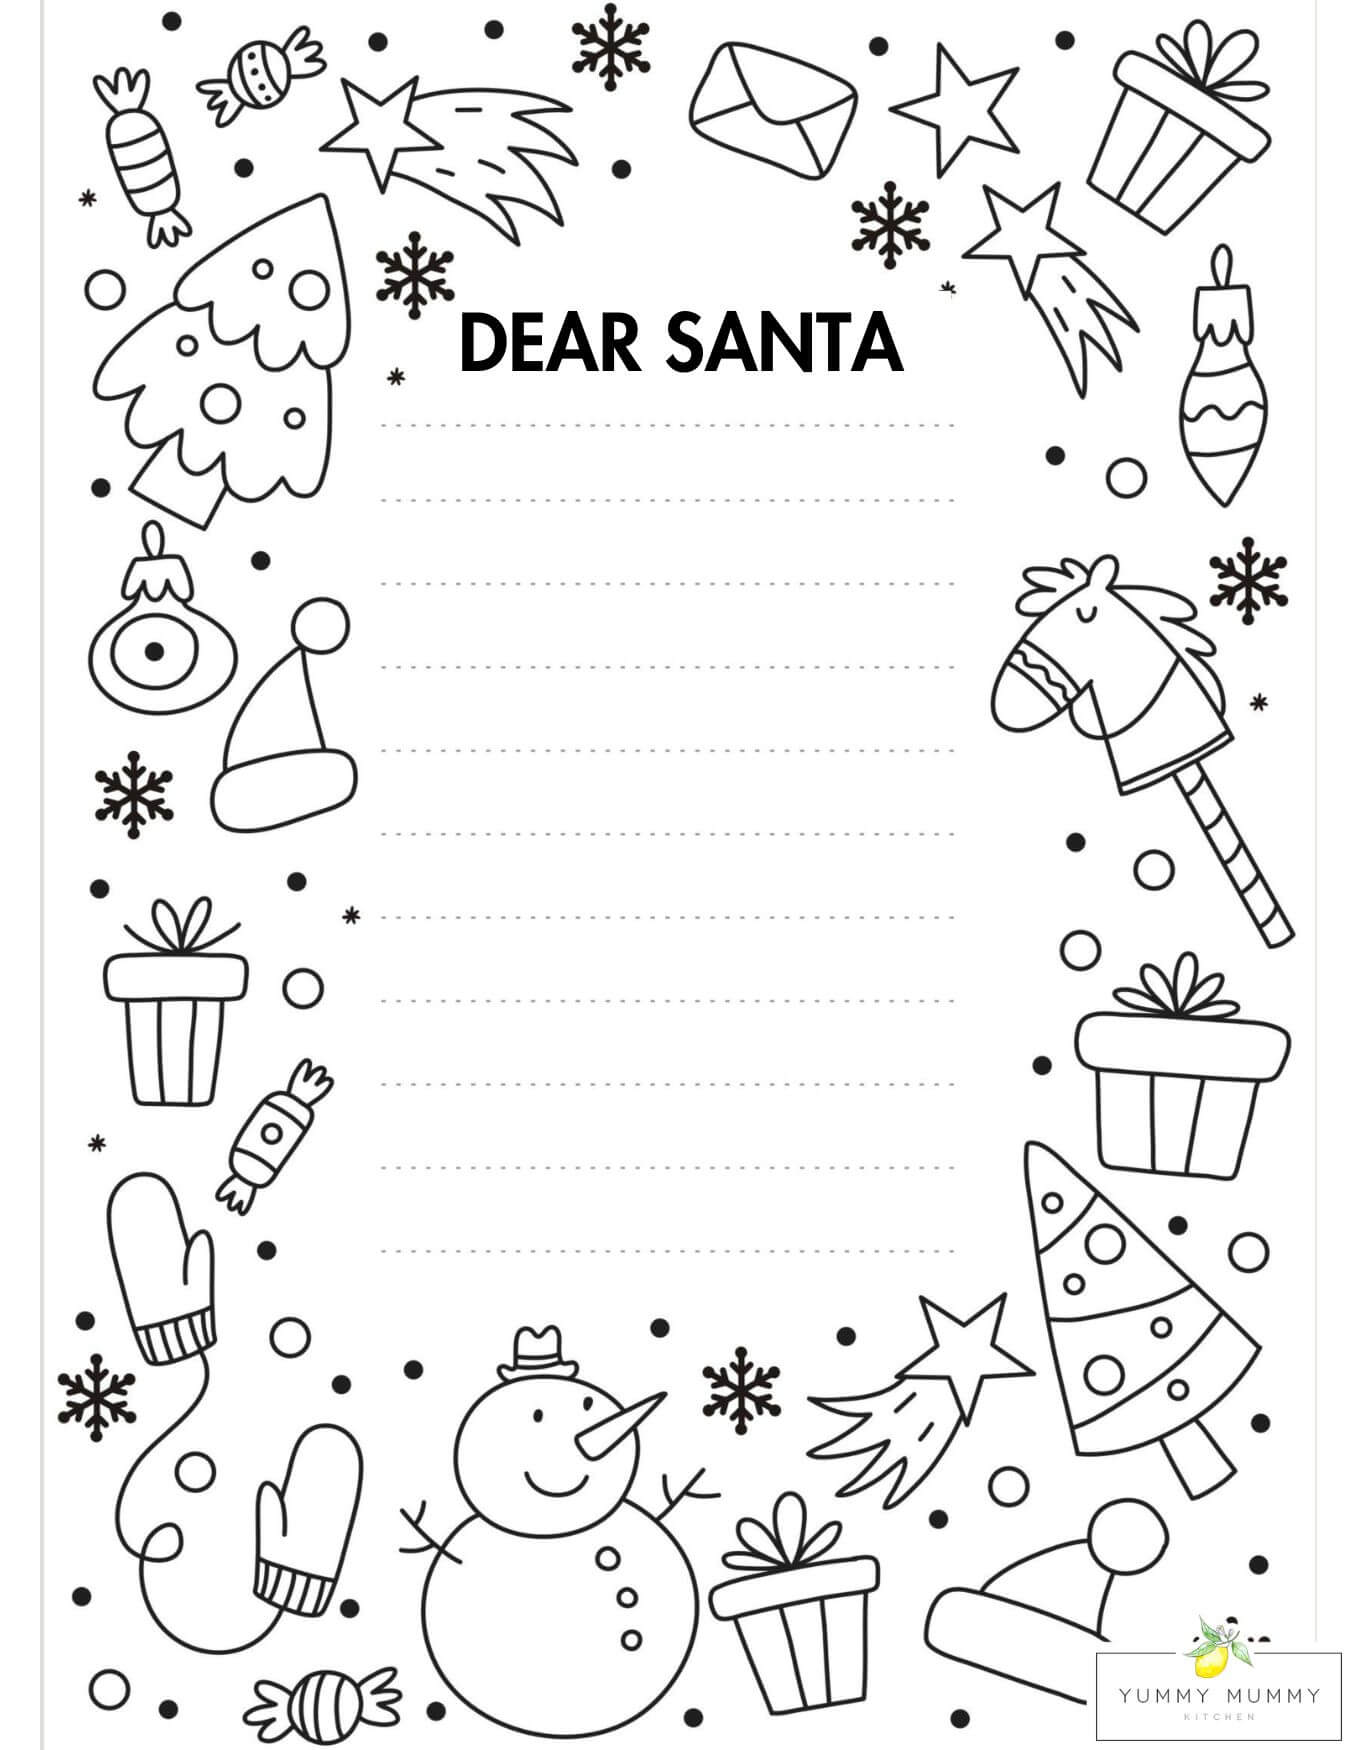 Letter to santa template